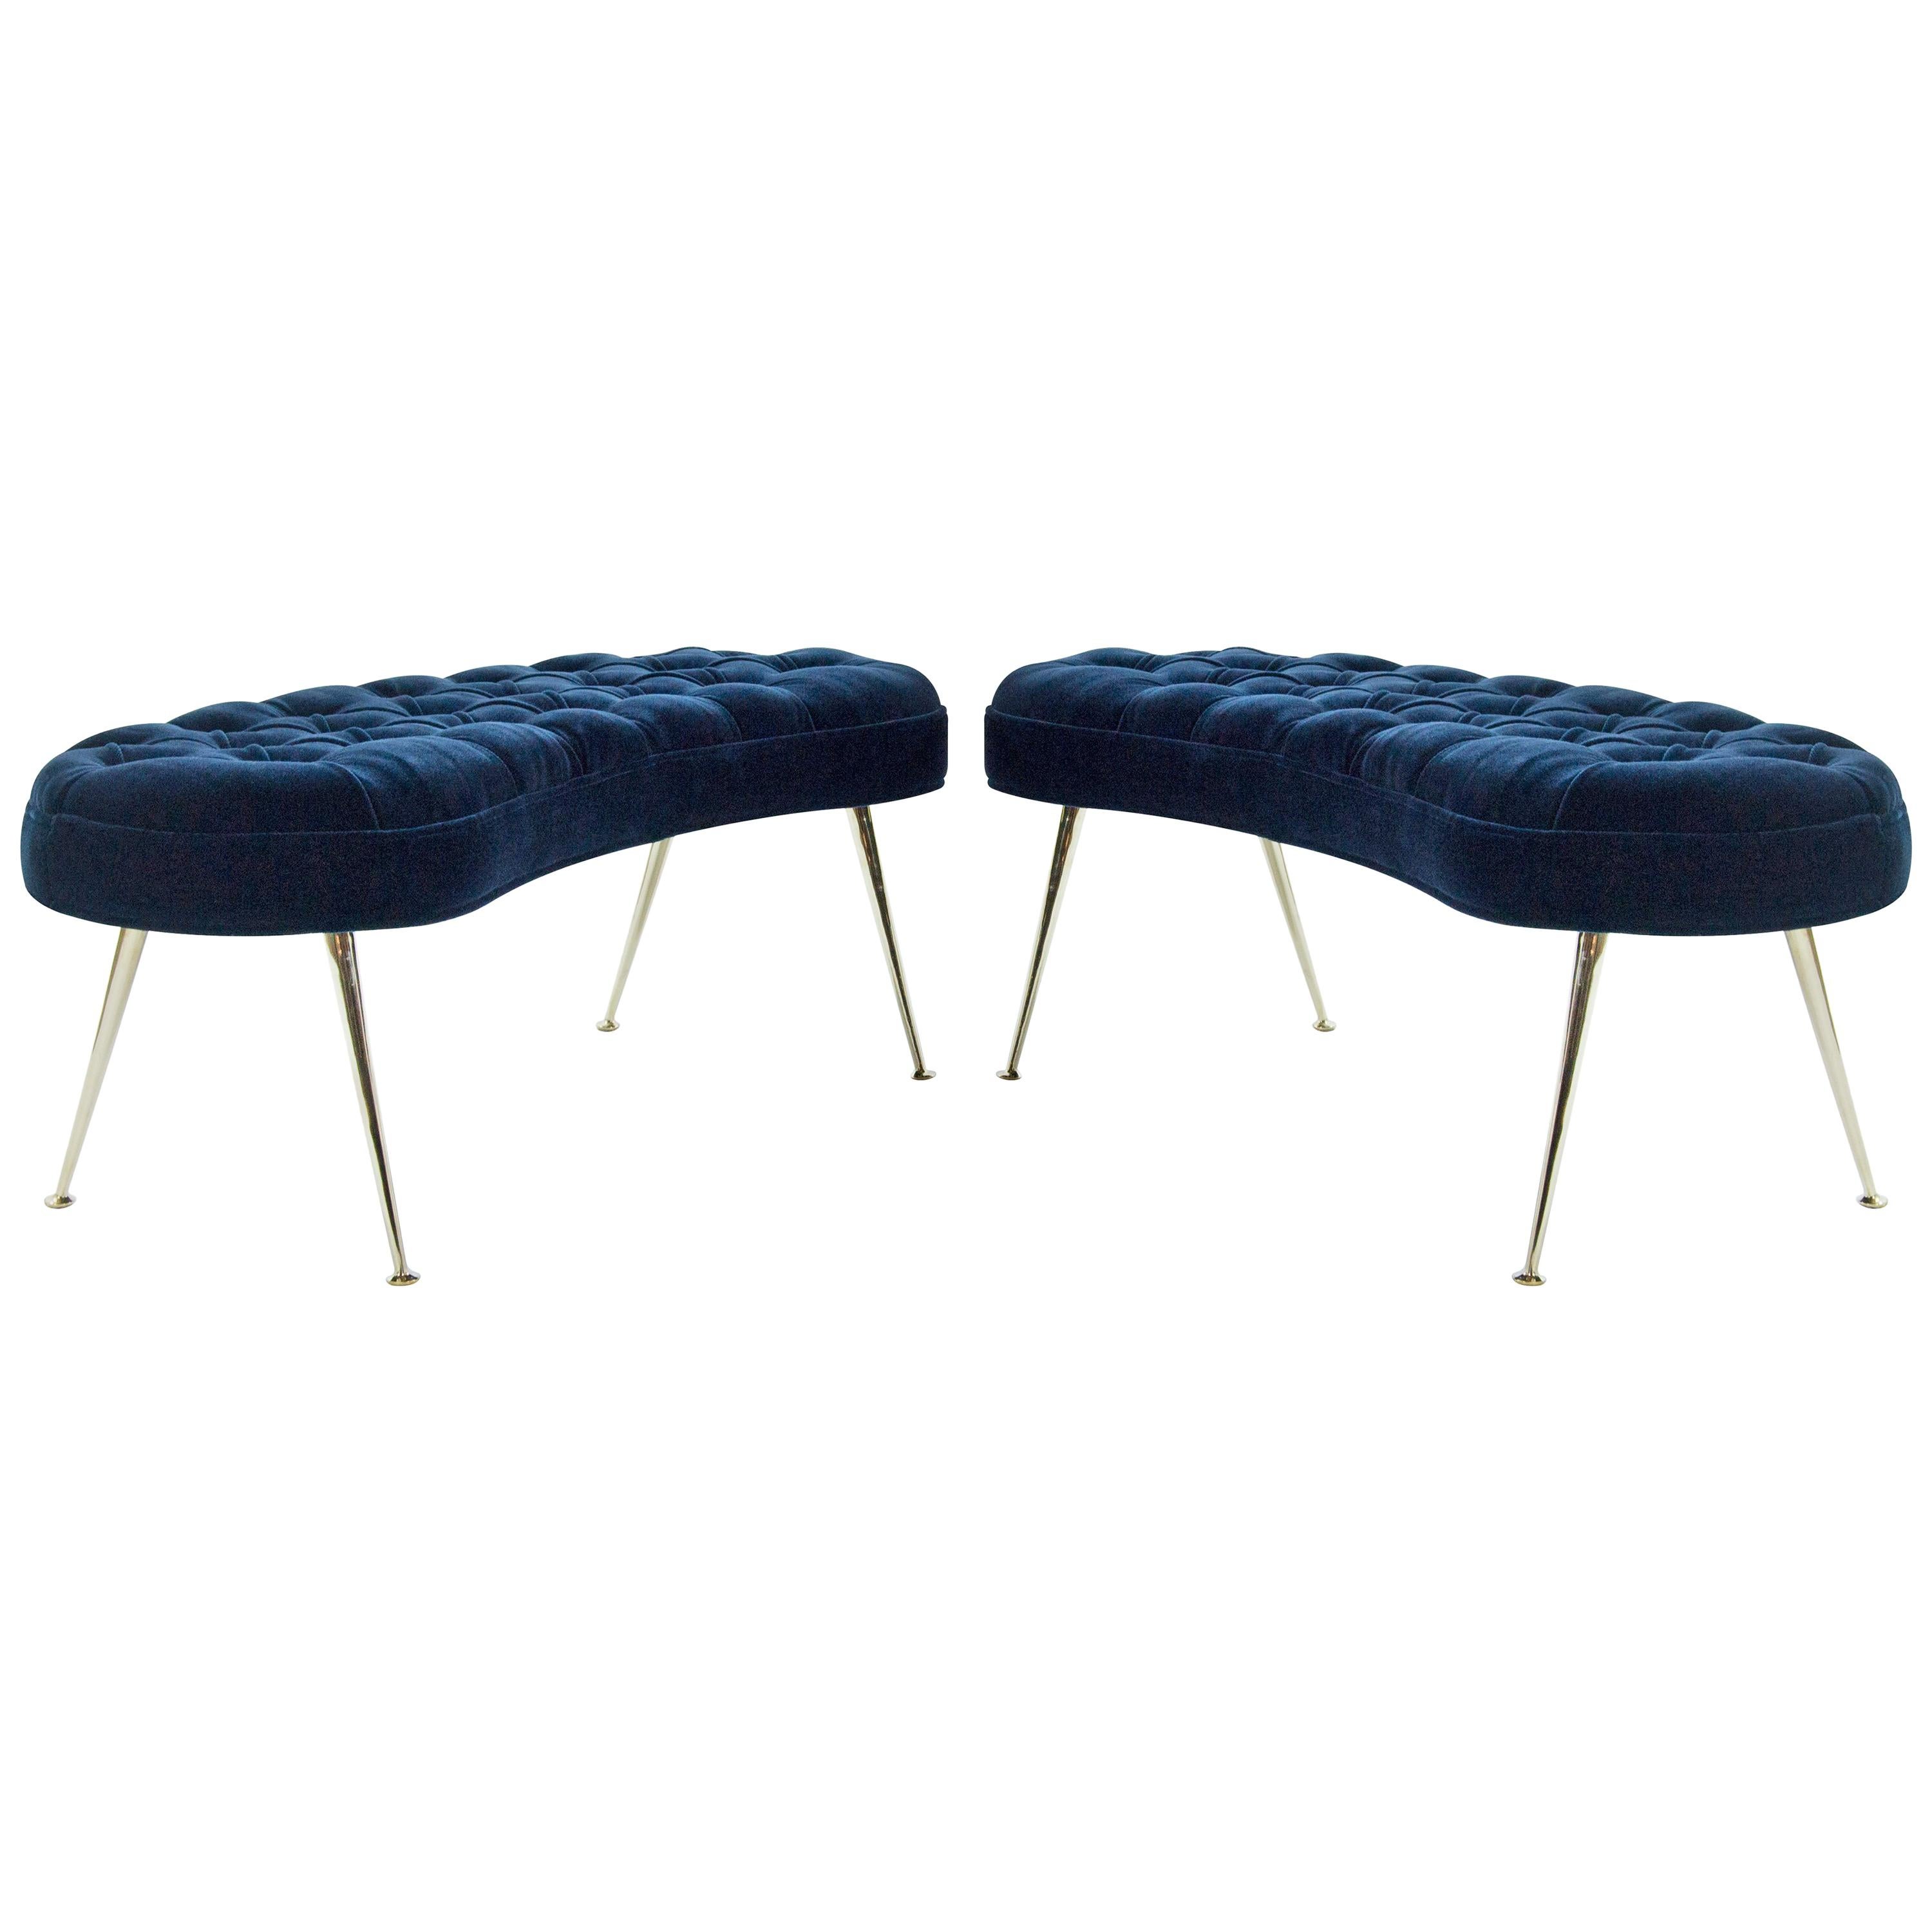 Pair of Tufted Benches in Deep Blue Mohair